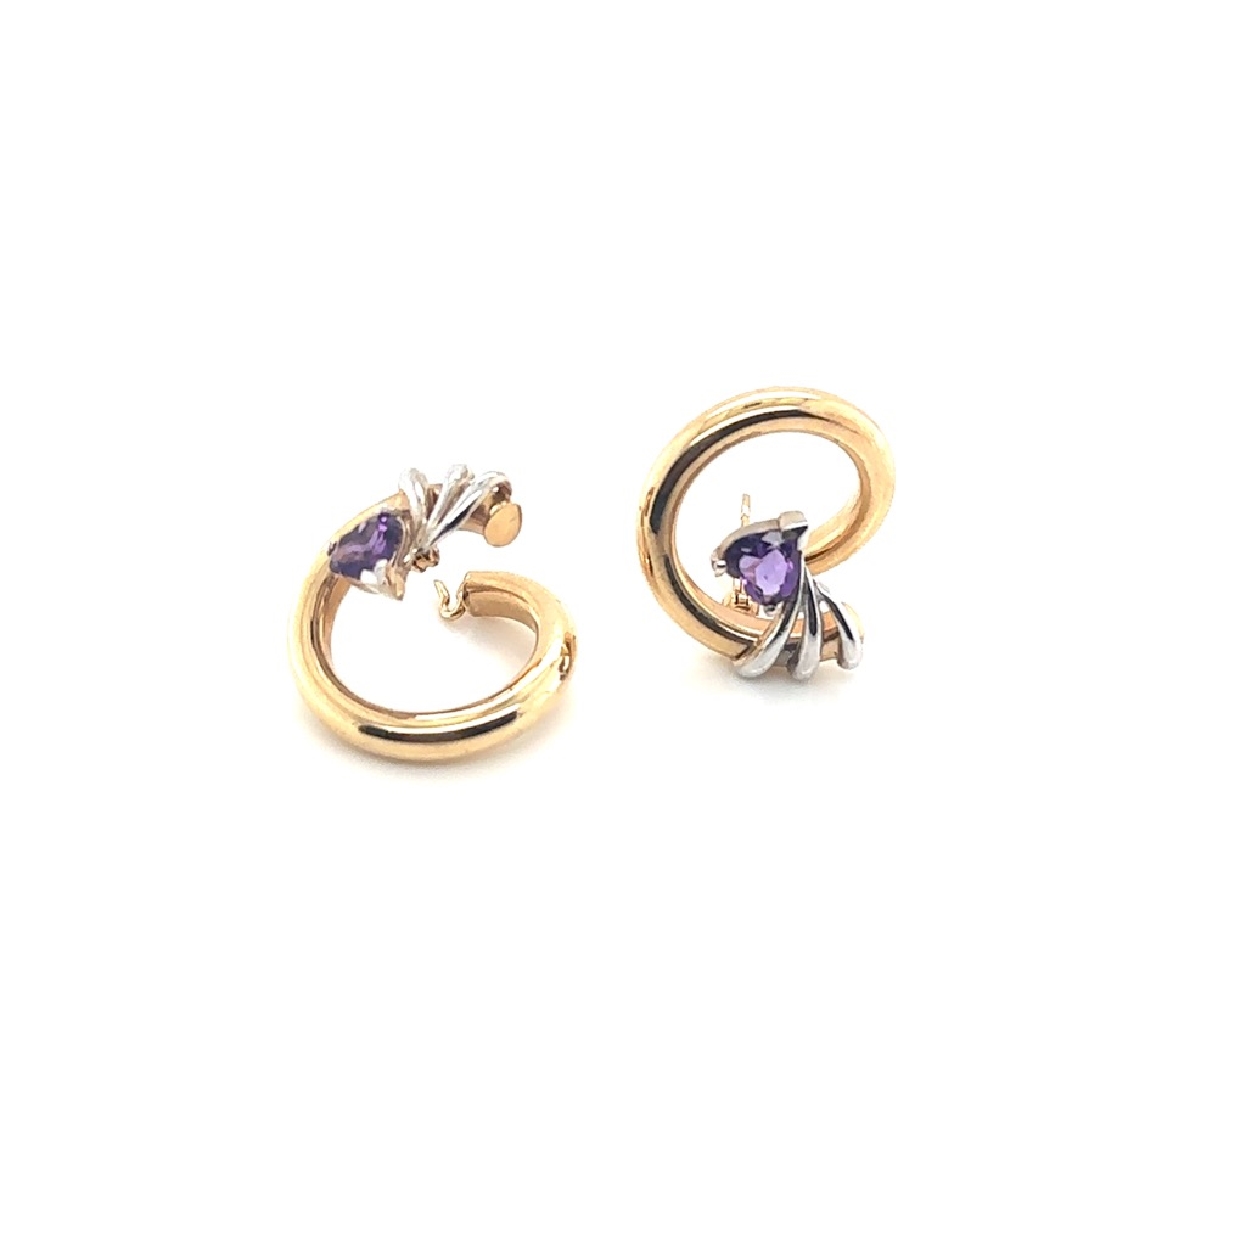 14K Two Toned Yellow and White Gold Earrings with Heart Amethyst

